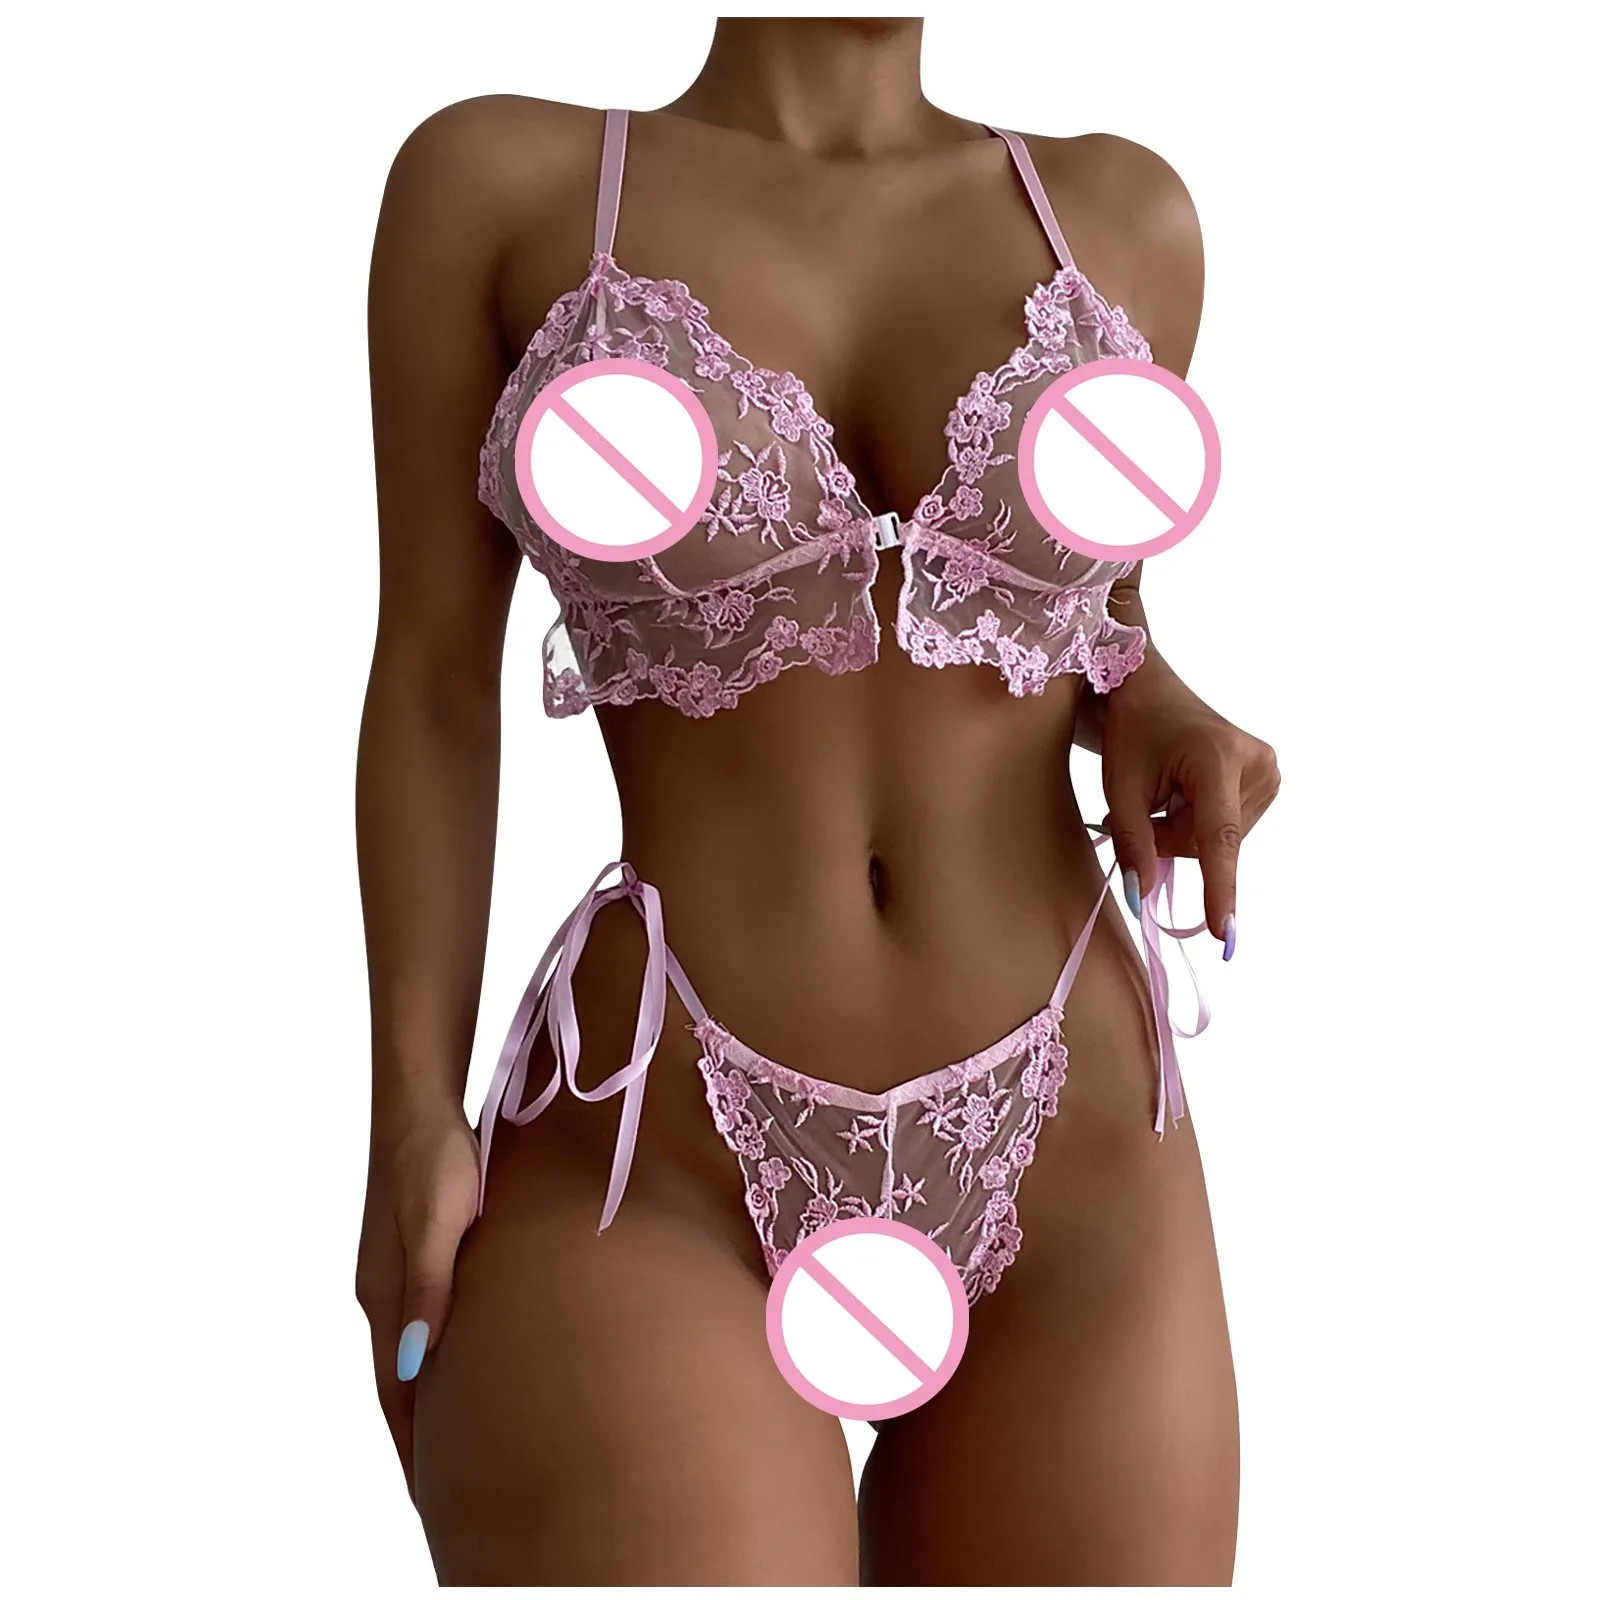 

Women's Erotic Underwear Thin Section See-through Mesh Embroidery Sexy Lingerie Underwire Bra Garter Belt Thong Suit Femme